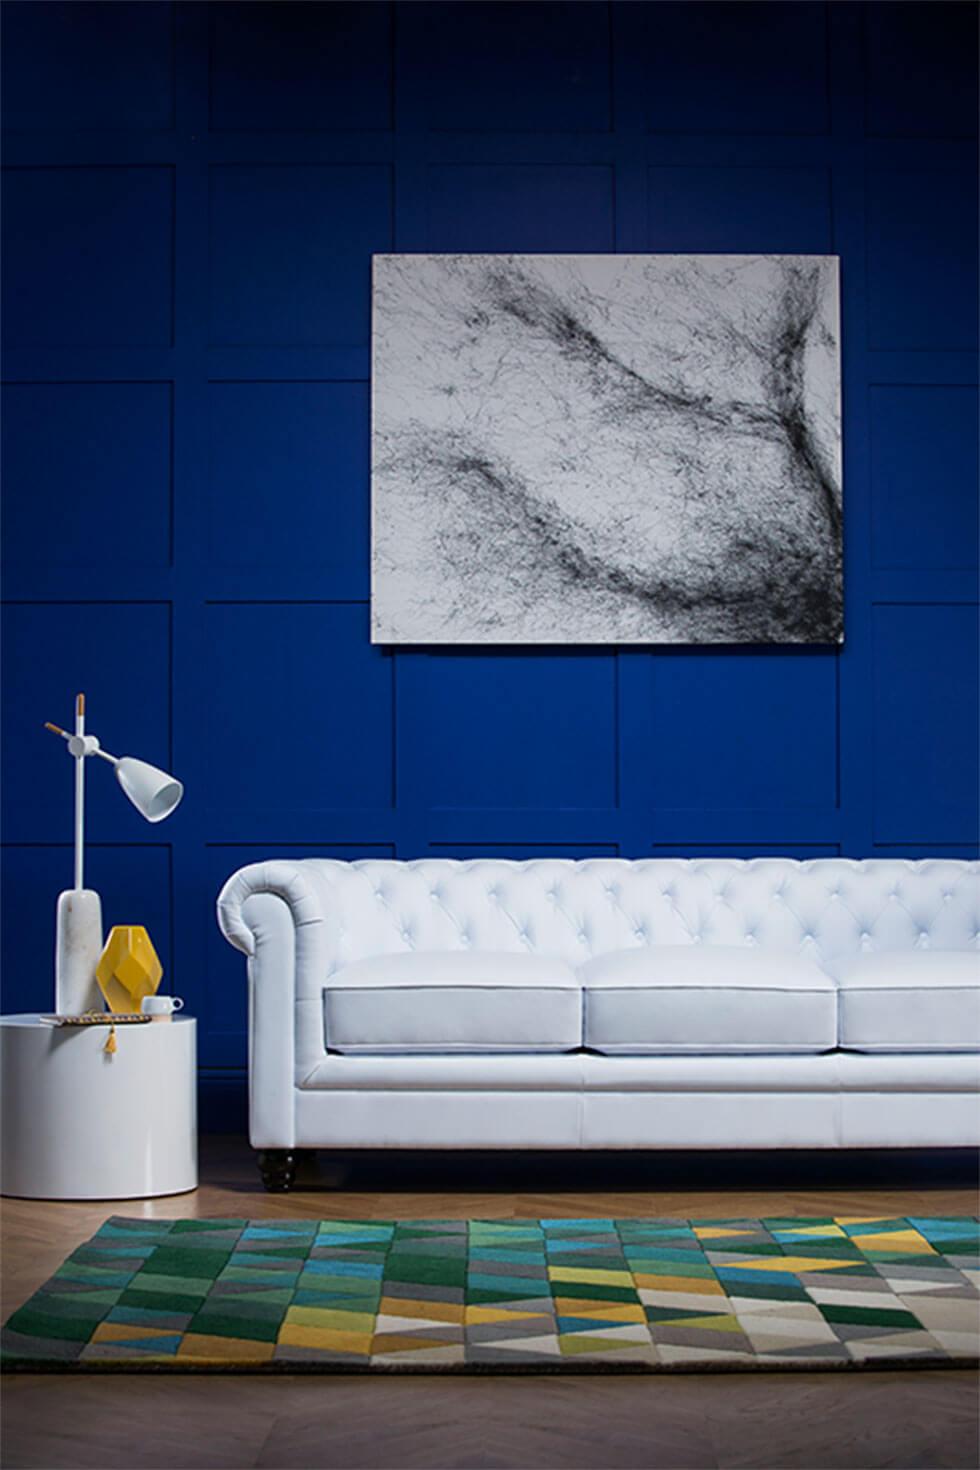 A white leather Chesterfield sofa in a living room with bold blue walls.